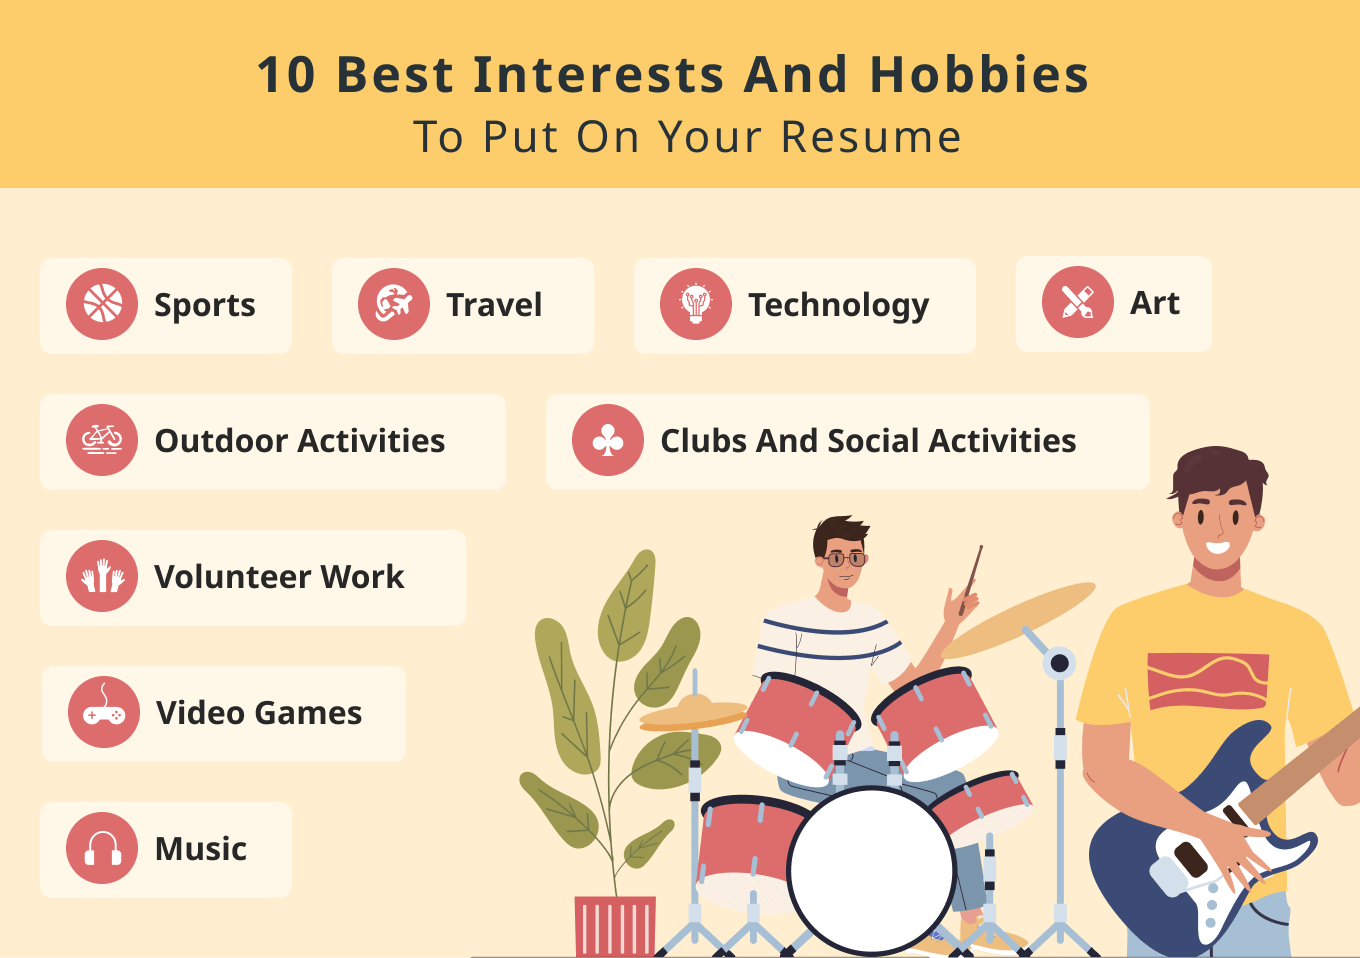 List of Interests and Hobbies to Put on Your Resume in 2022